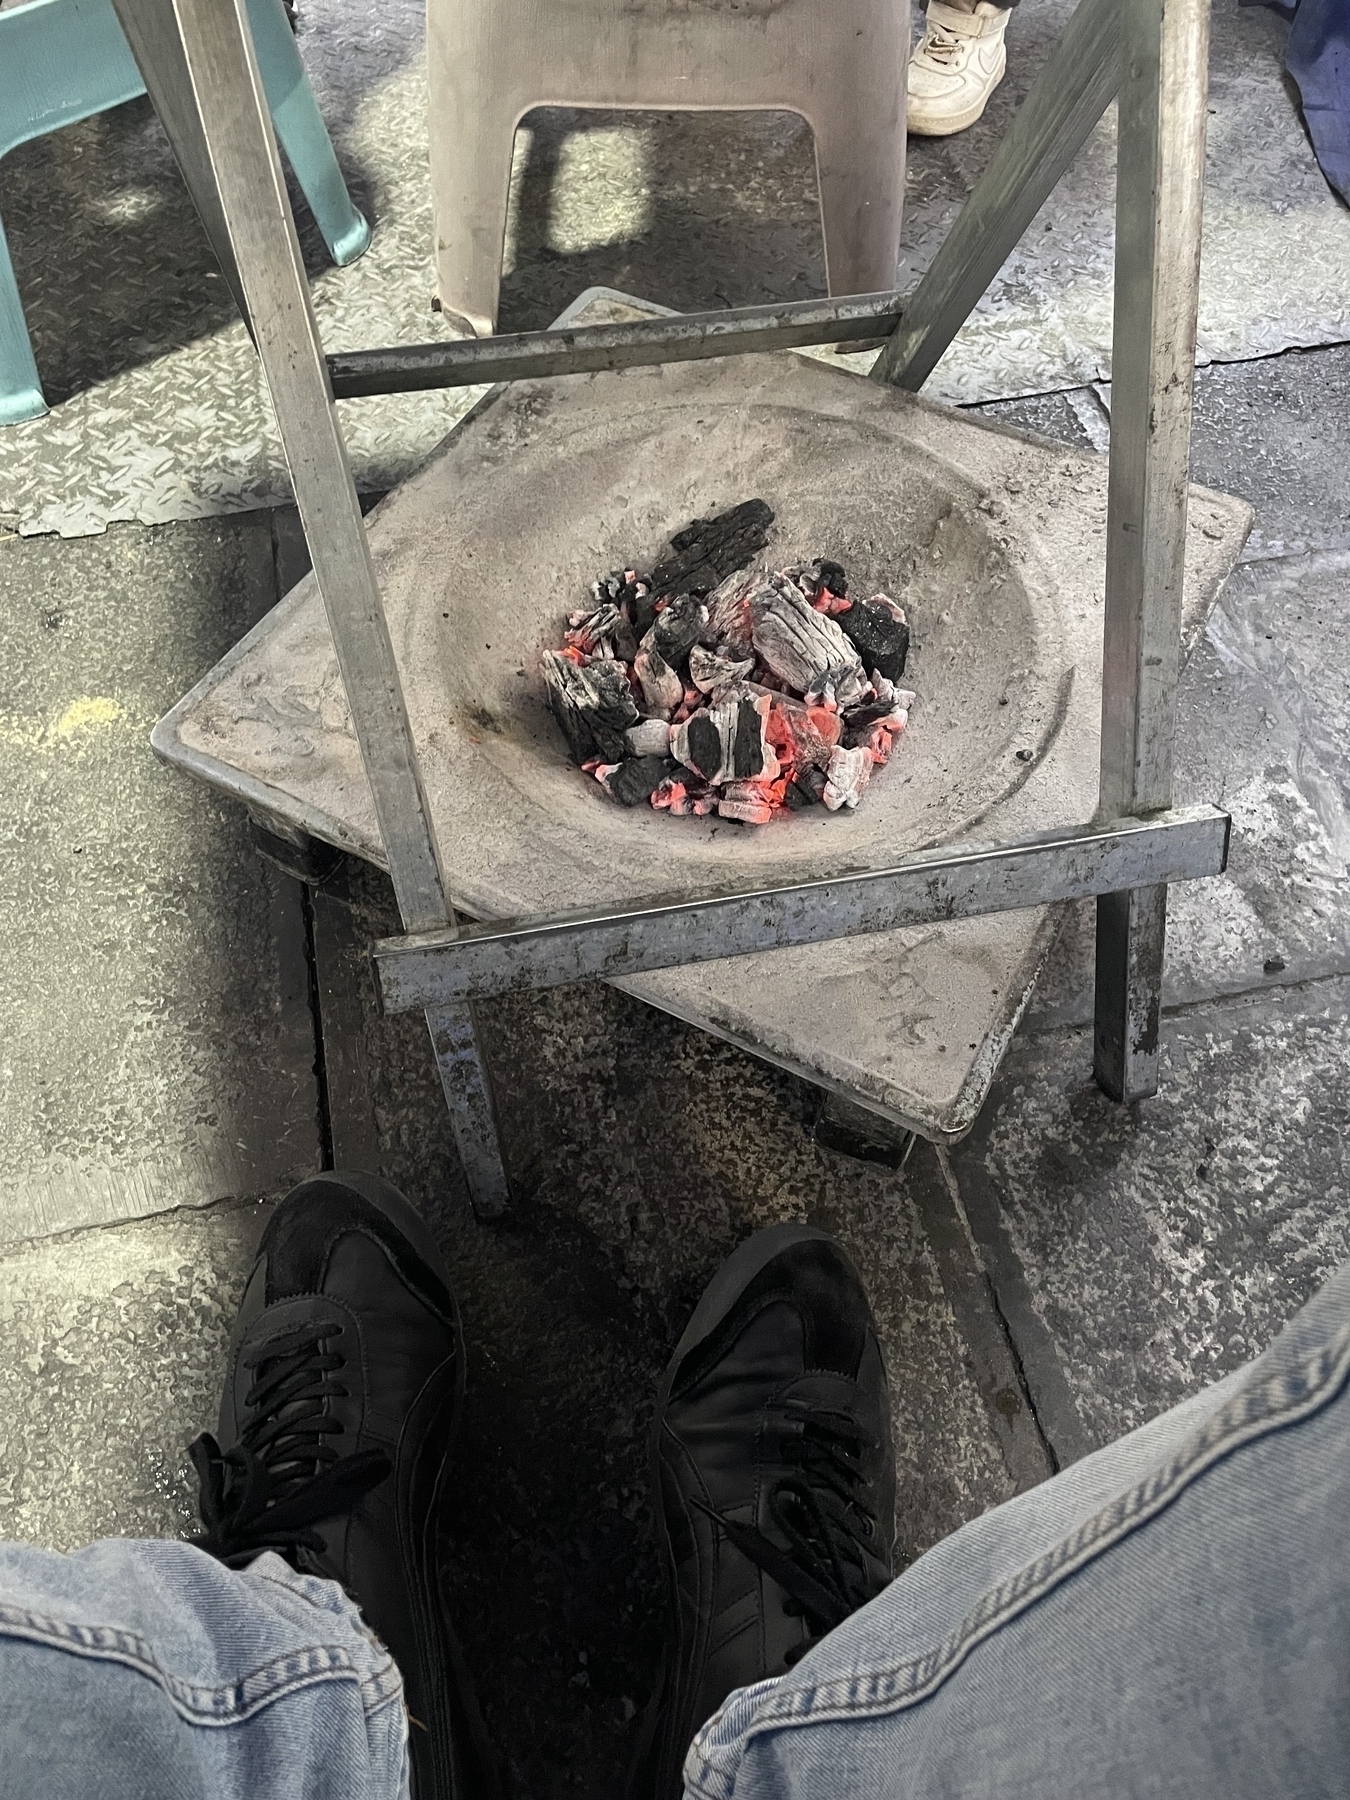 Hot coals under the table to keep warm.